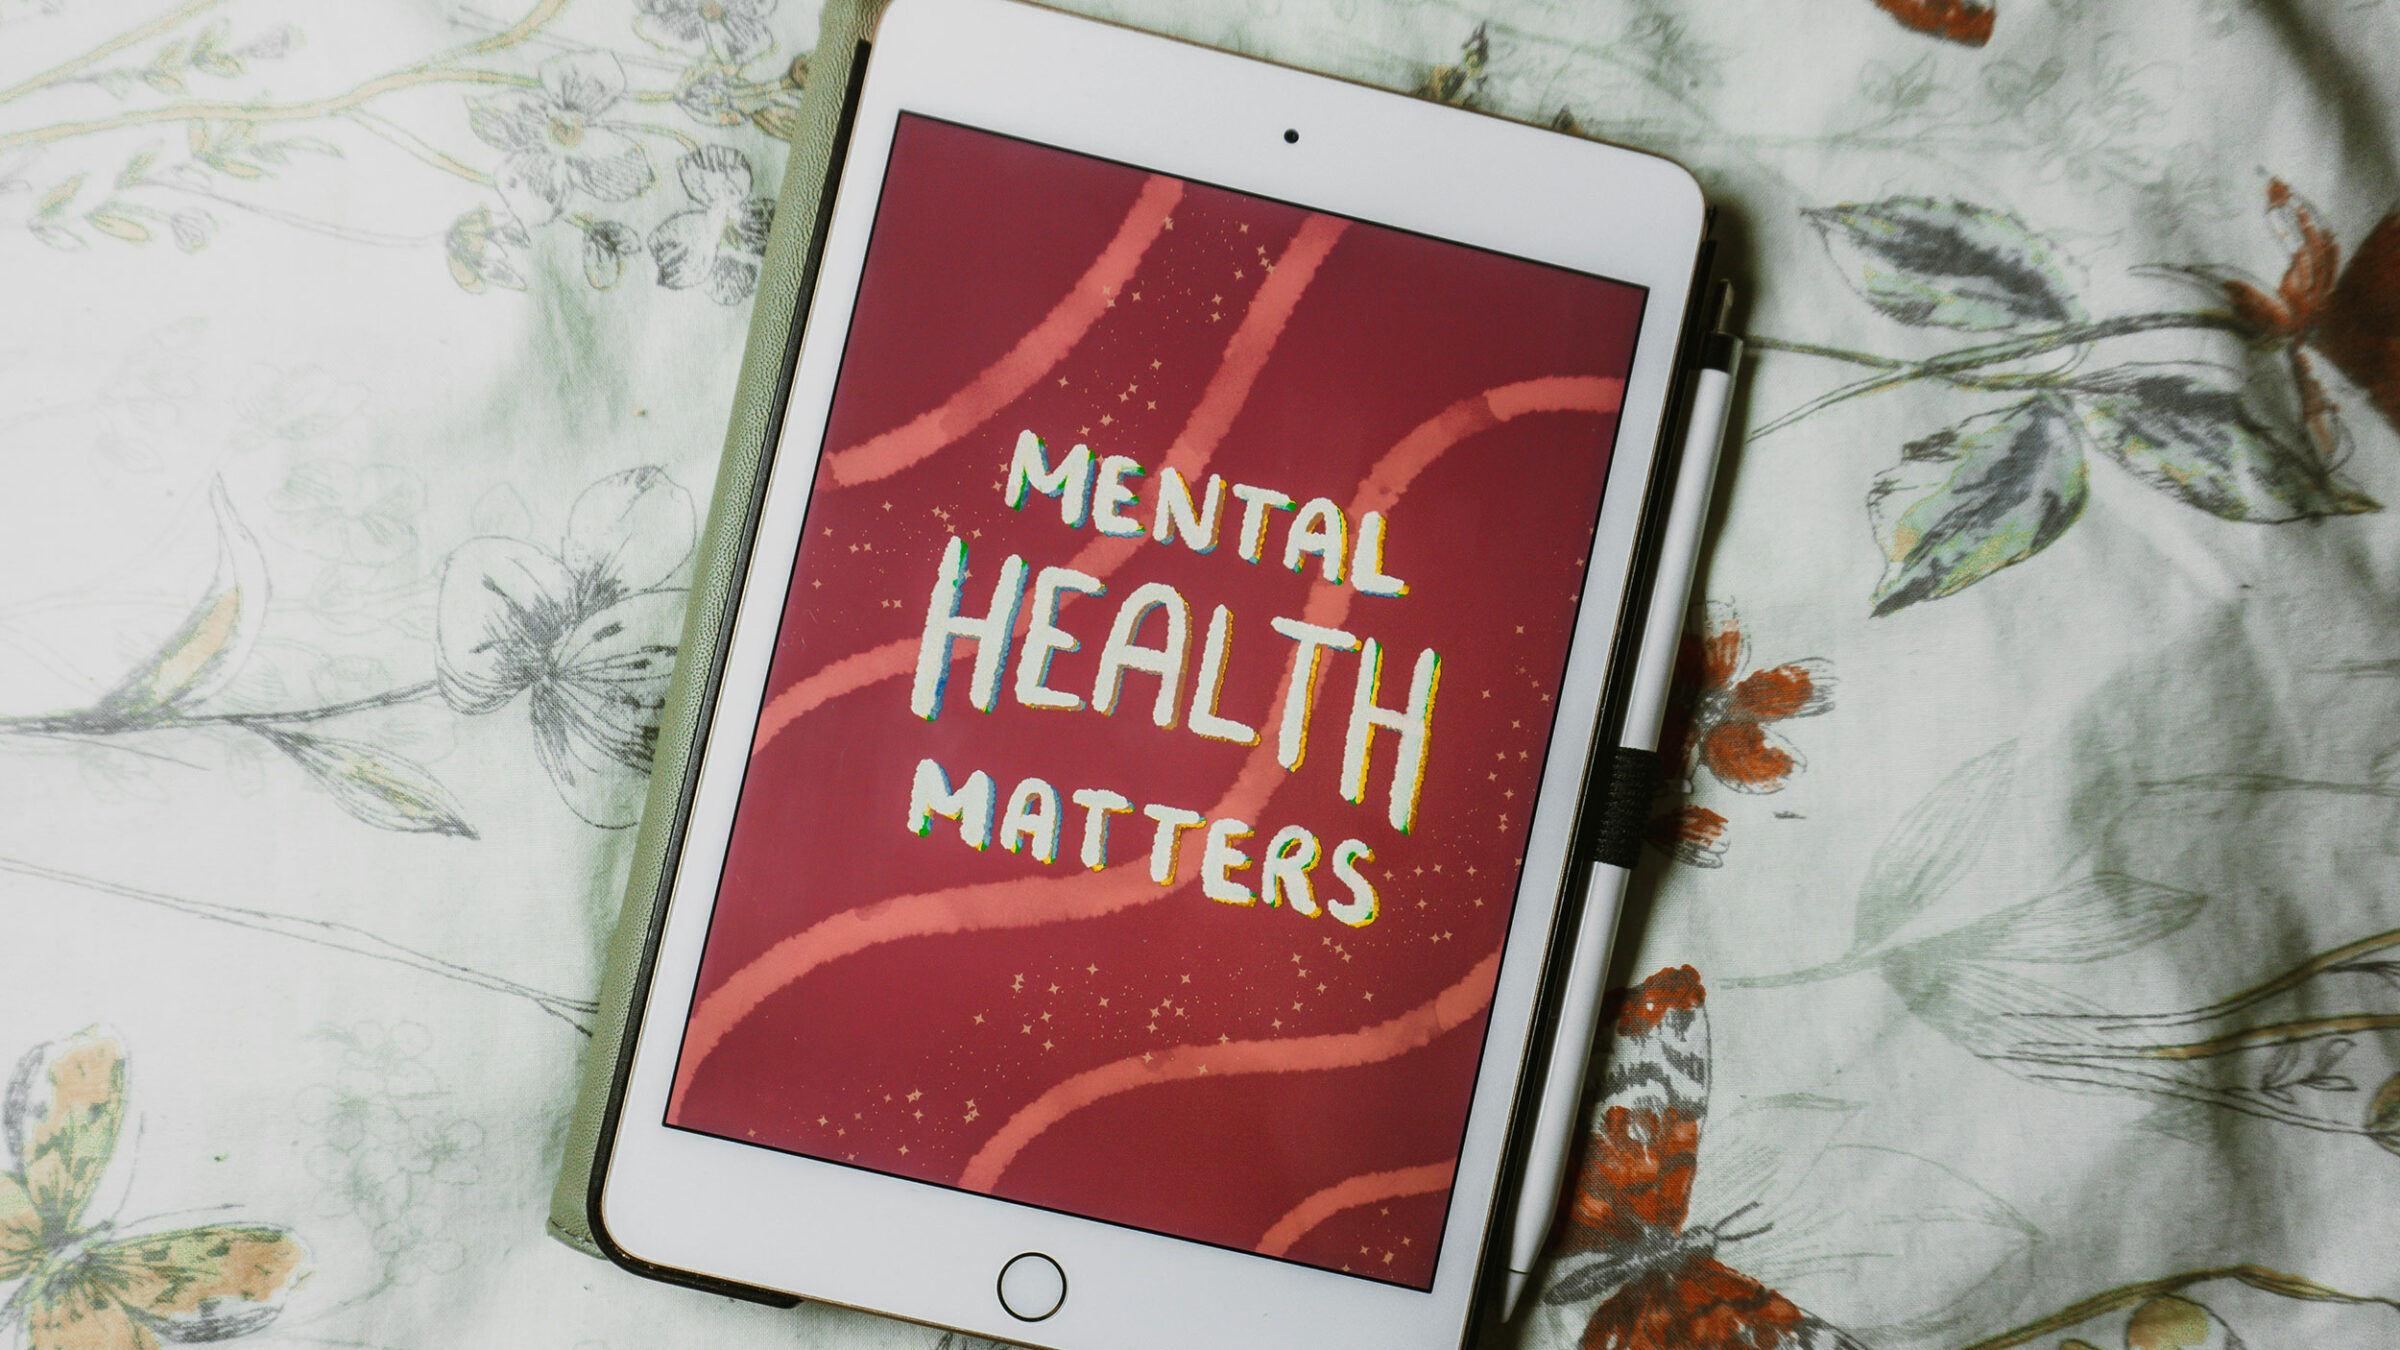 an ipad shows a graphic with a red background and white text reading: "mental health matters"